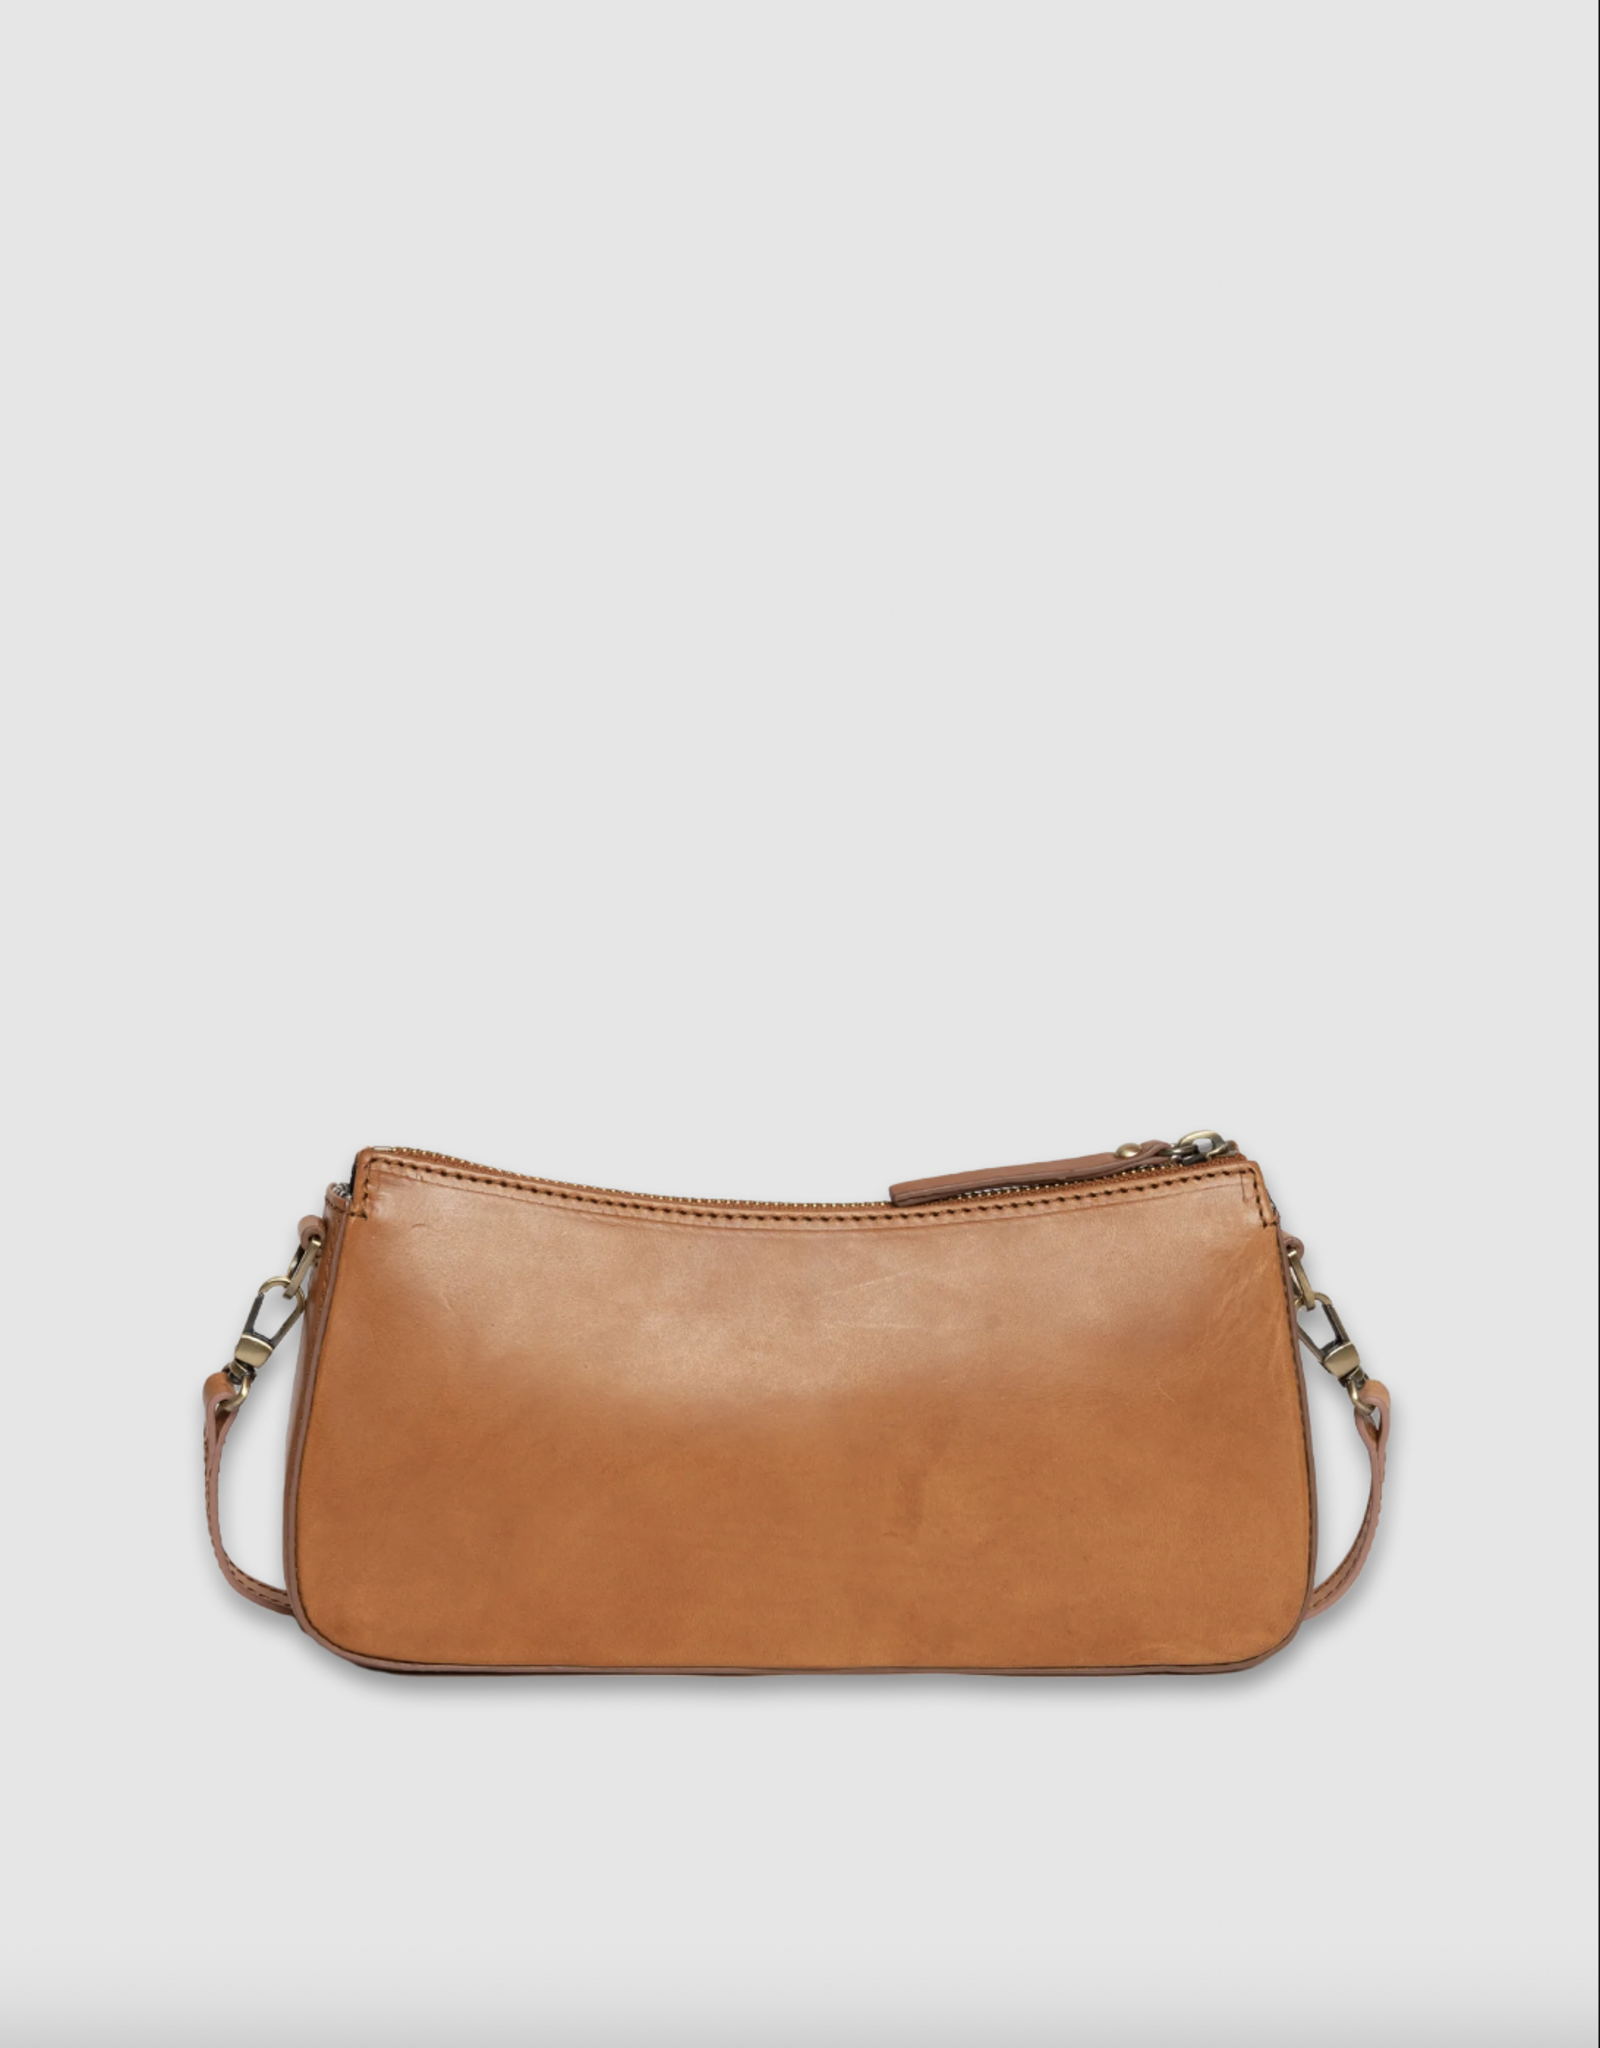 O My Bag Oh My Bag- Taylor Cognac Classic leather